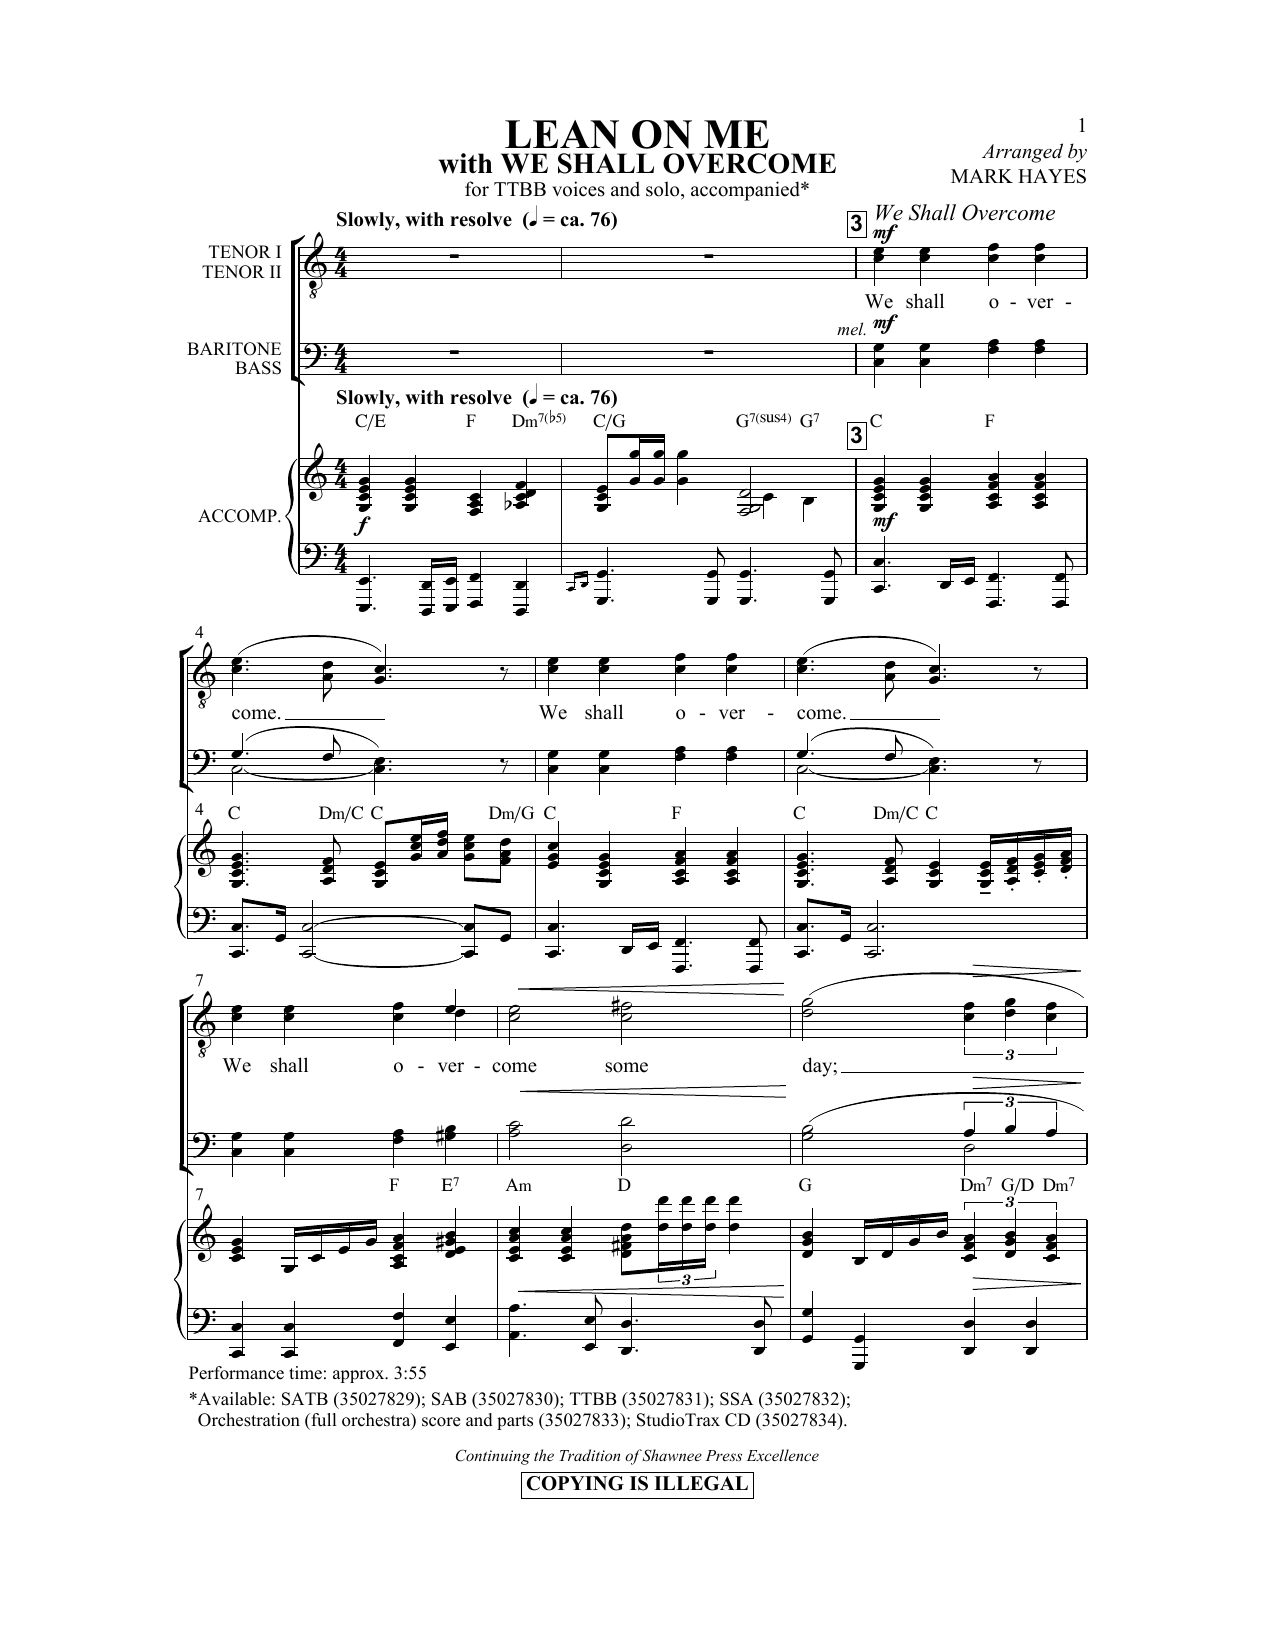 Download Mark Hayes Lean On Me (with We Shall Overcome) Sheet Music